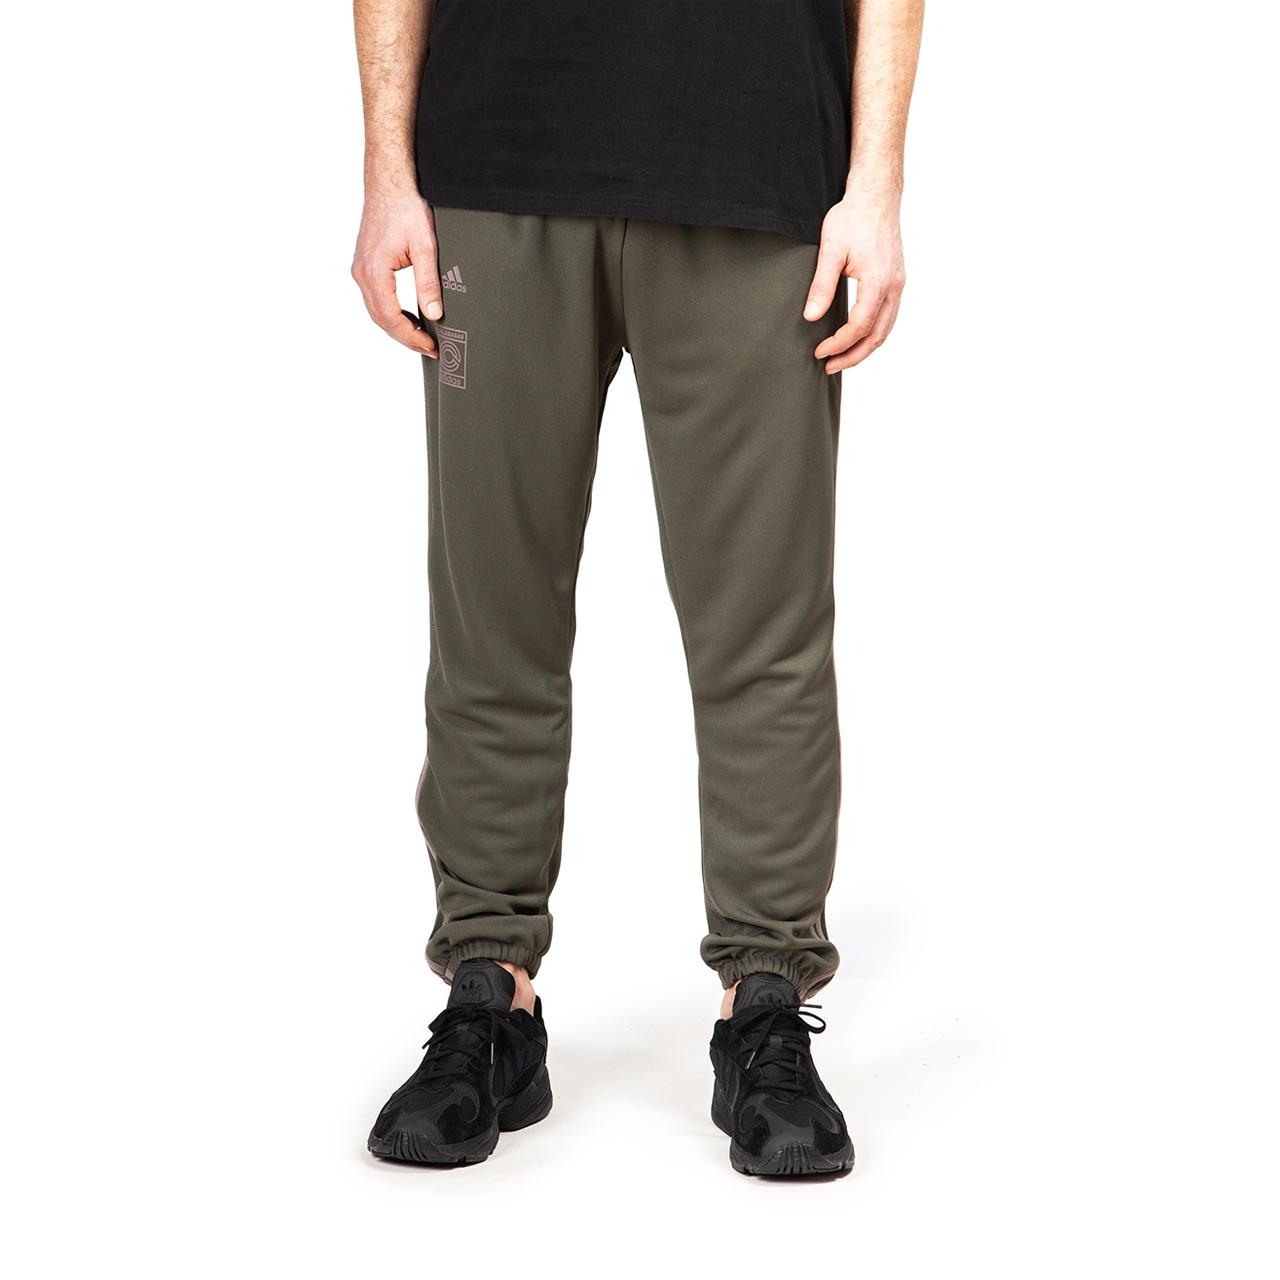 adidas Synthetic Yeezy Calabasas Track Pant in Olive (Green) for Men - Lyst